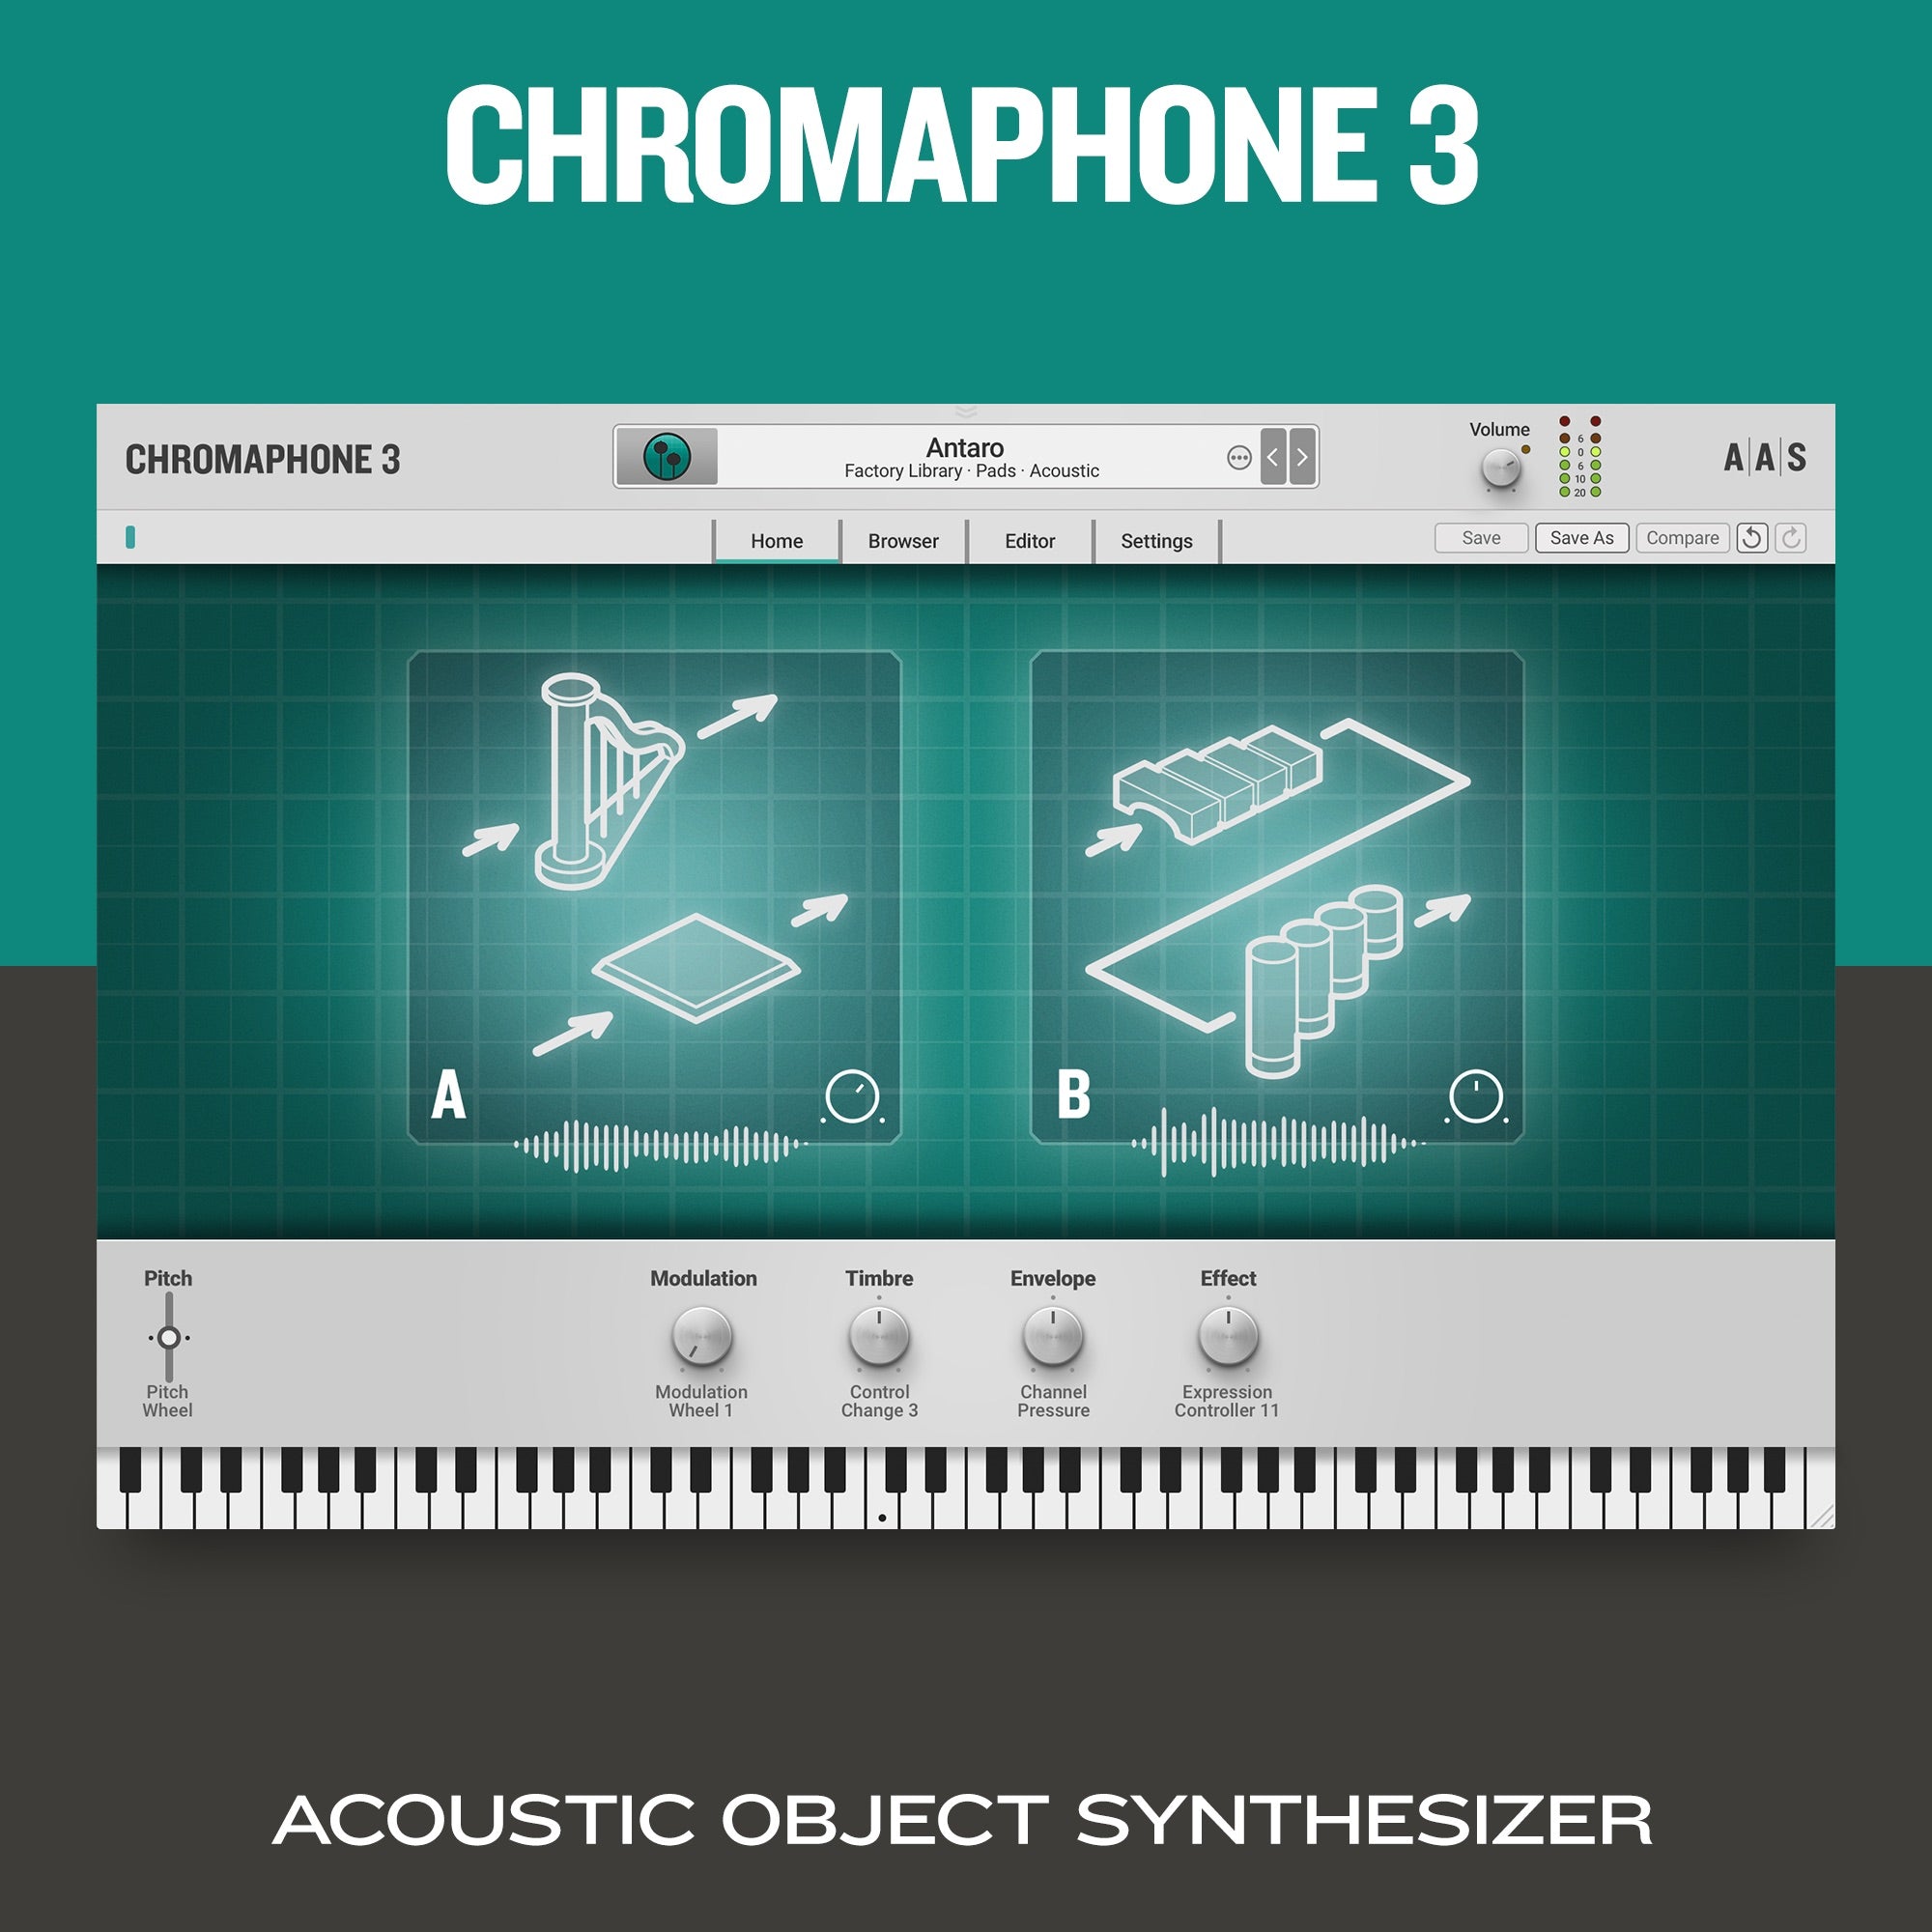 Applied Acoustics Systems Chromaphone 3 Upgrade from Chromaphone 2 (requires Chromaphone 2)